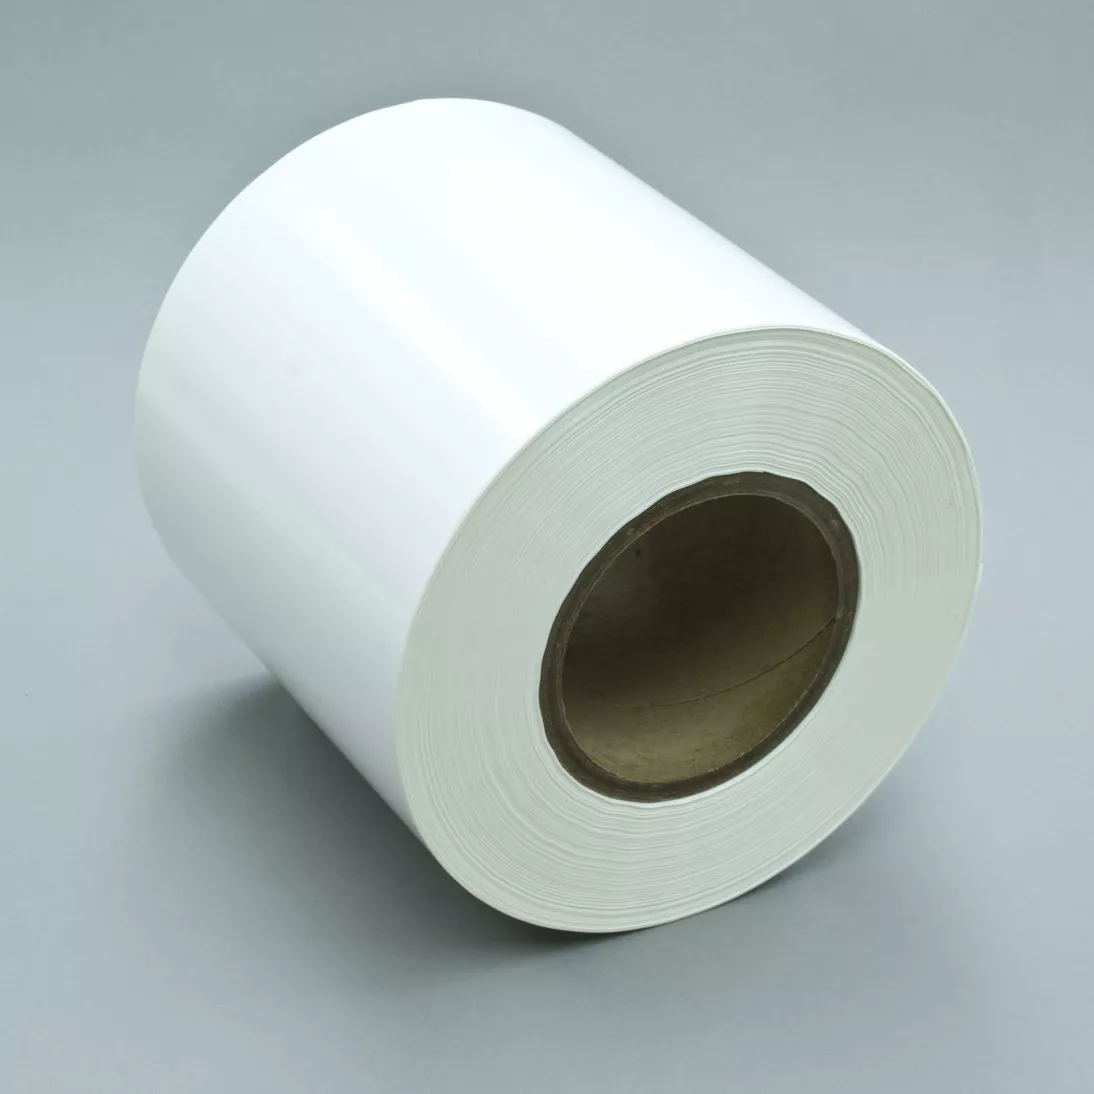 3M™ Thermal Transfer Label Material 7816, White Polyester Gloss, 6 in x
1668 ft, 1 Roll/Case